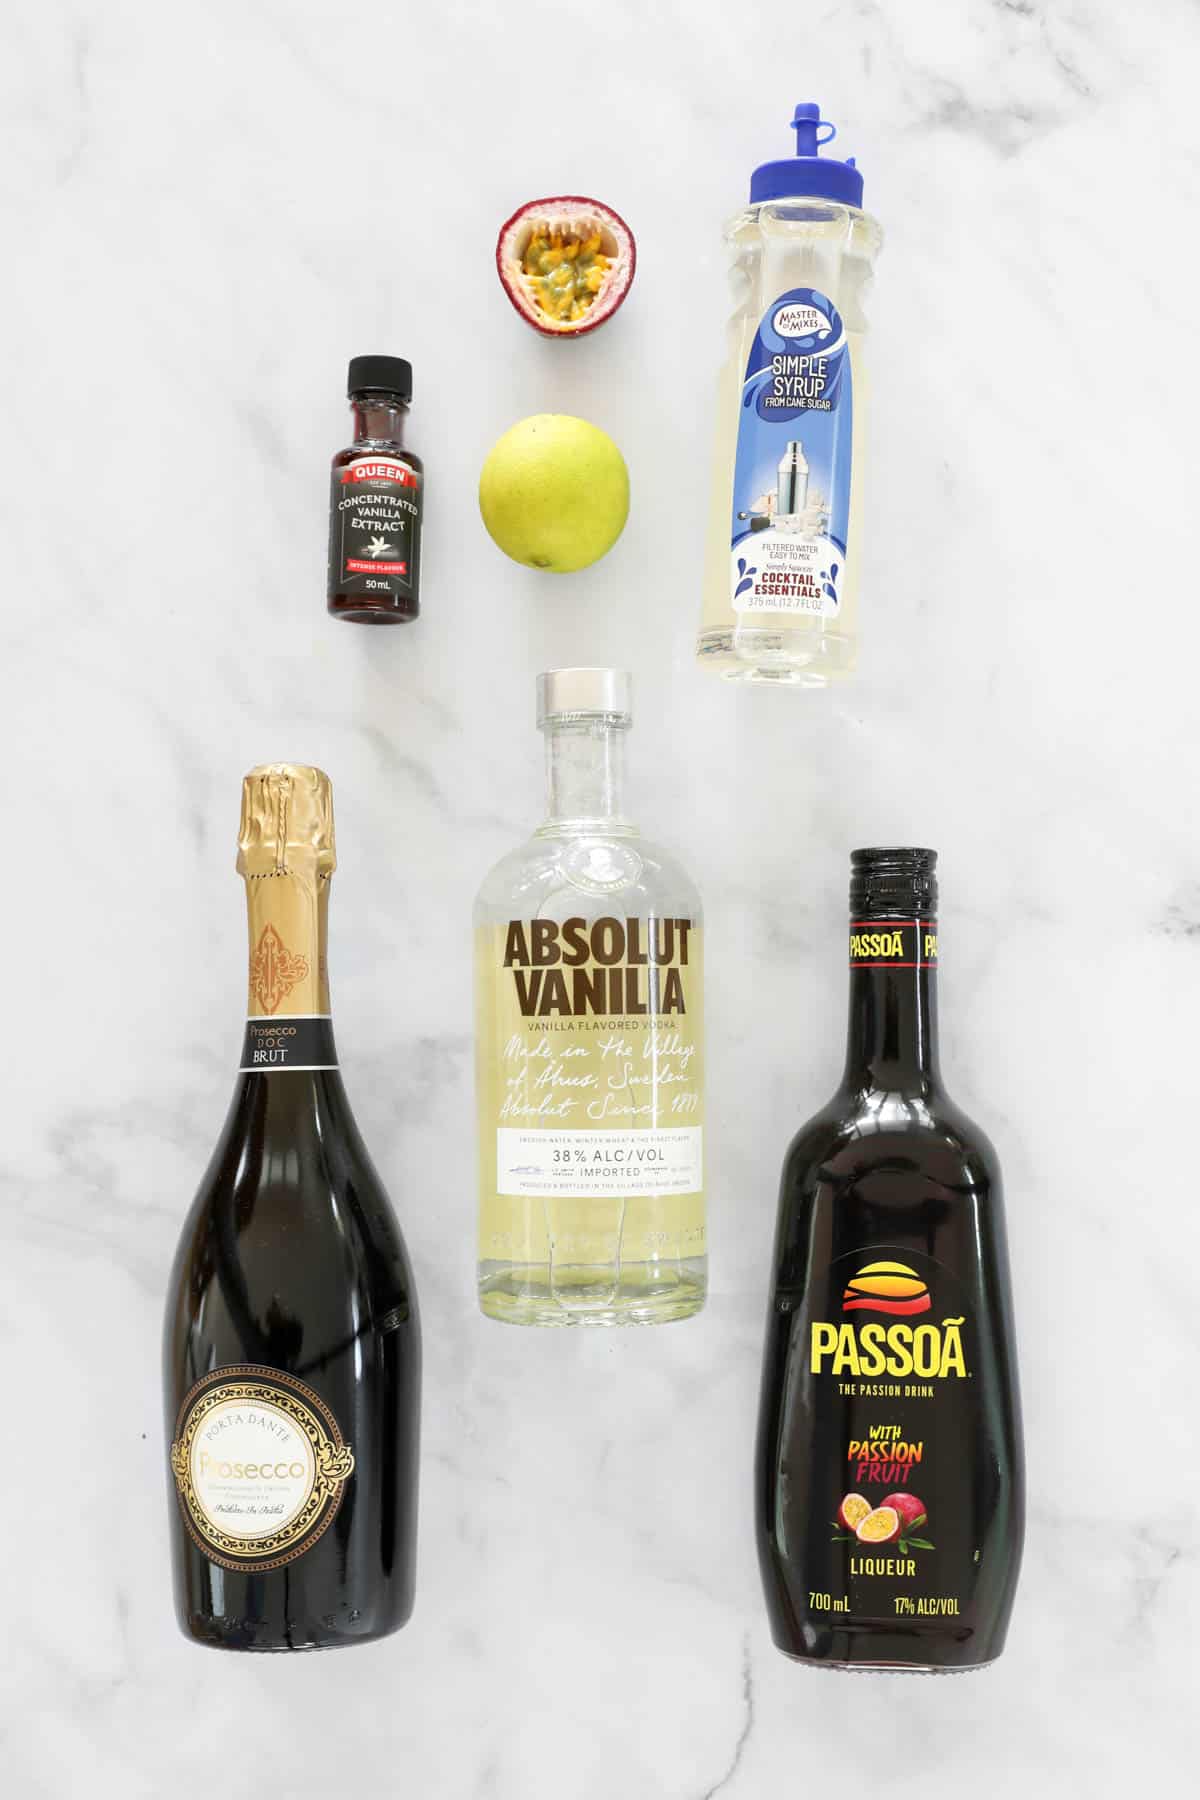 The ingredients for a passionfruit pornstar martini.